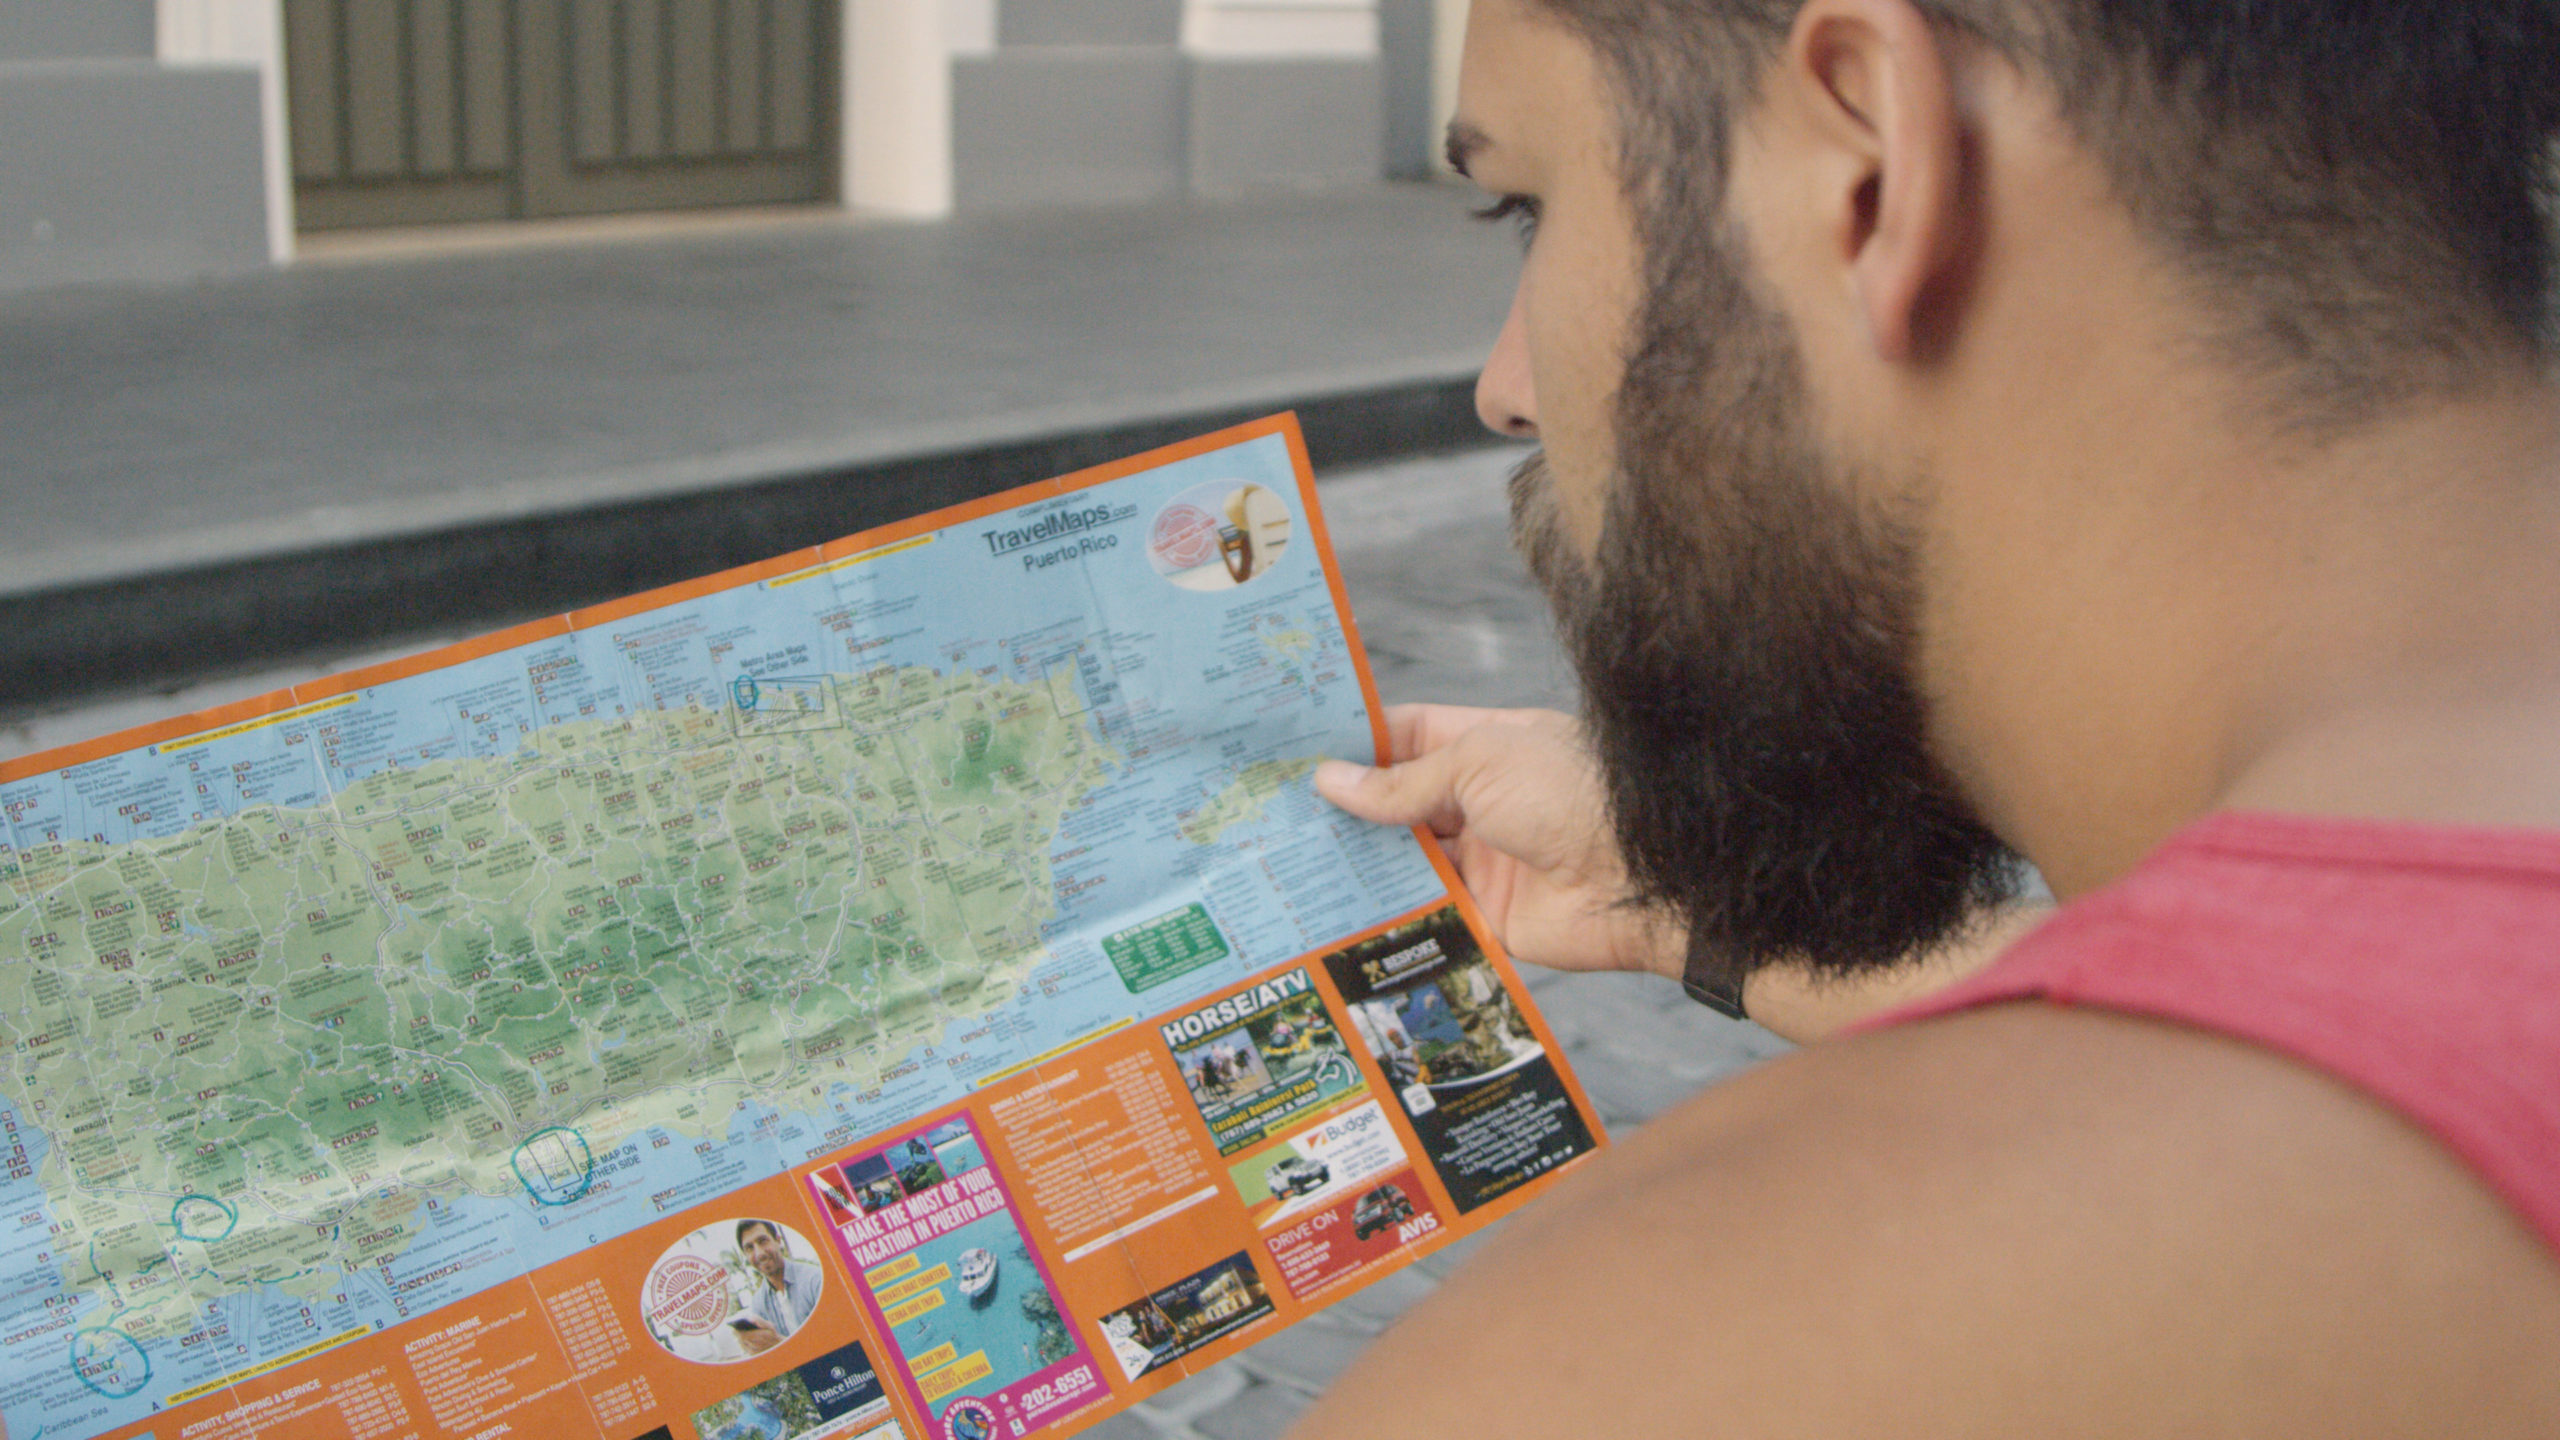 Blackmile Closeup look over the shoulder of a man with a bushy beard looking at a map of Puerto Rico island